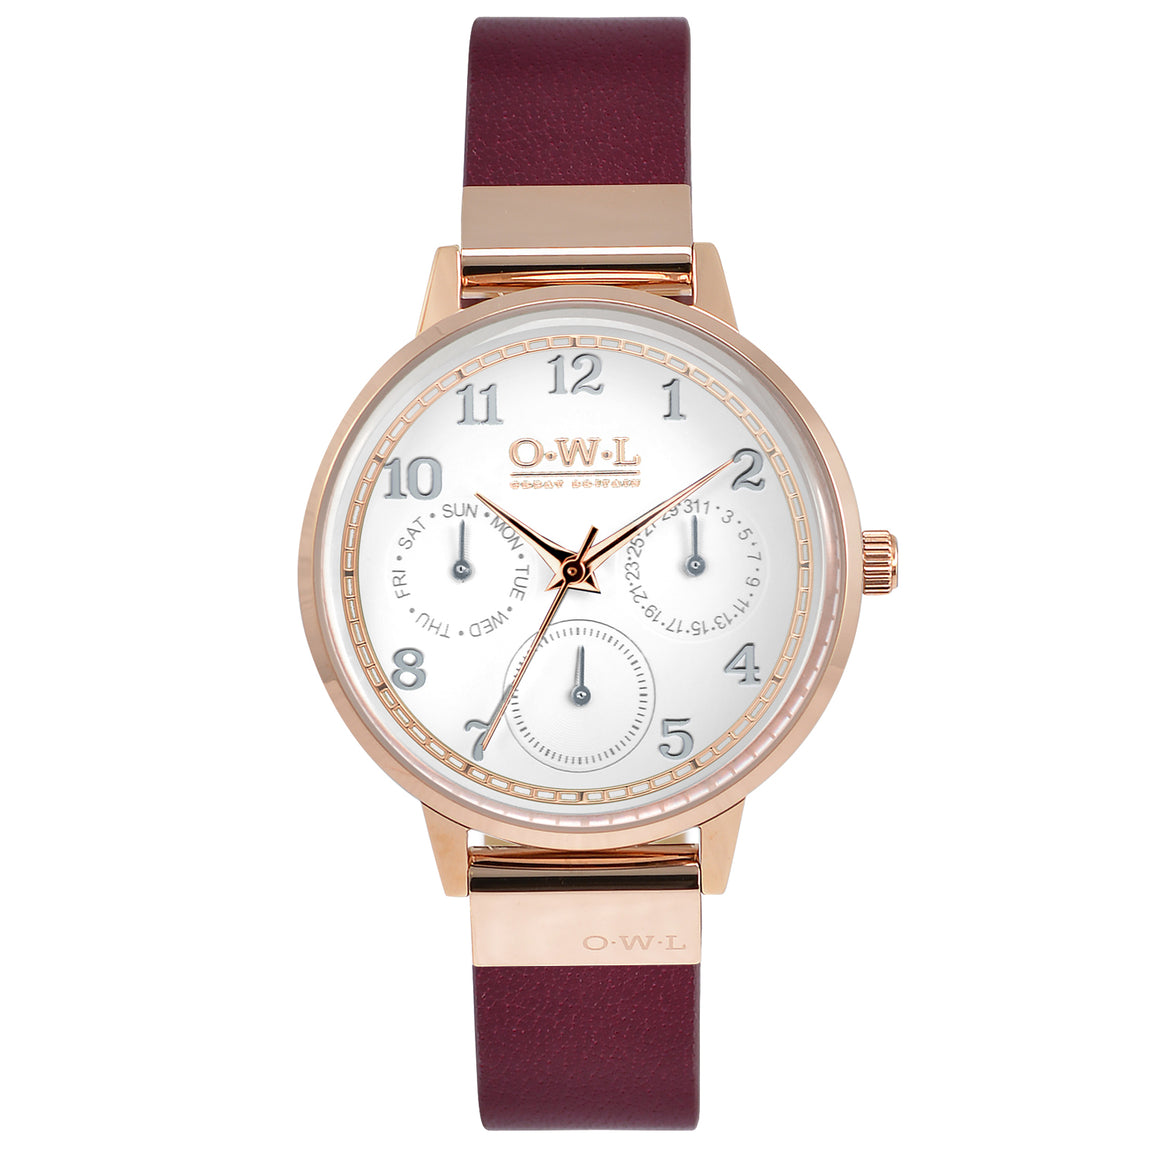 HELMSLEY WATCH WITH ROSE-GOLD CASE, WHITE MULTI-DIAL FACE & DEEP RED LEATHER STRAP